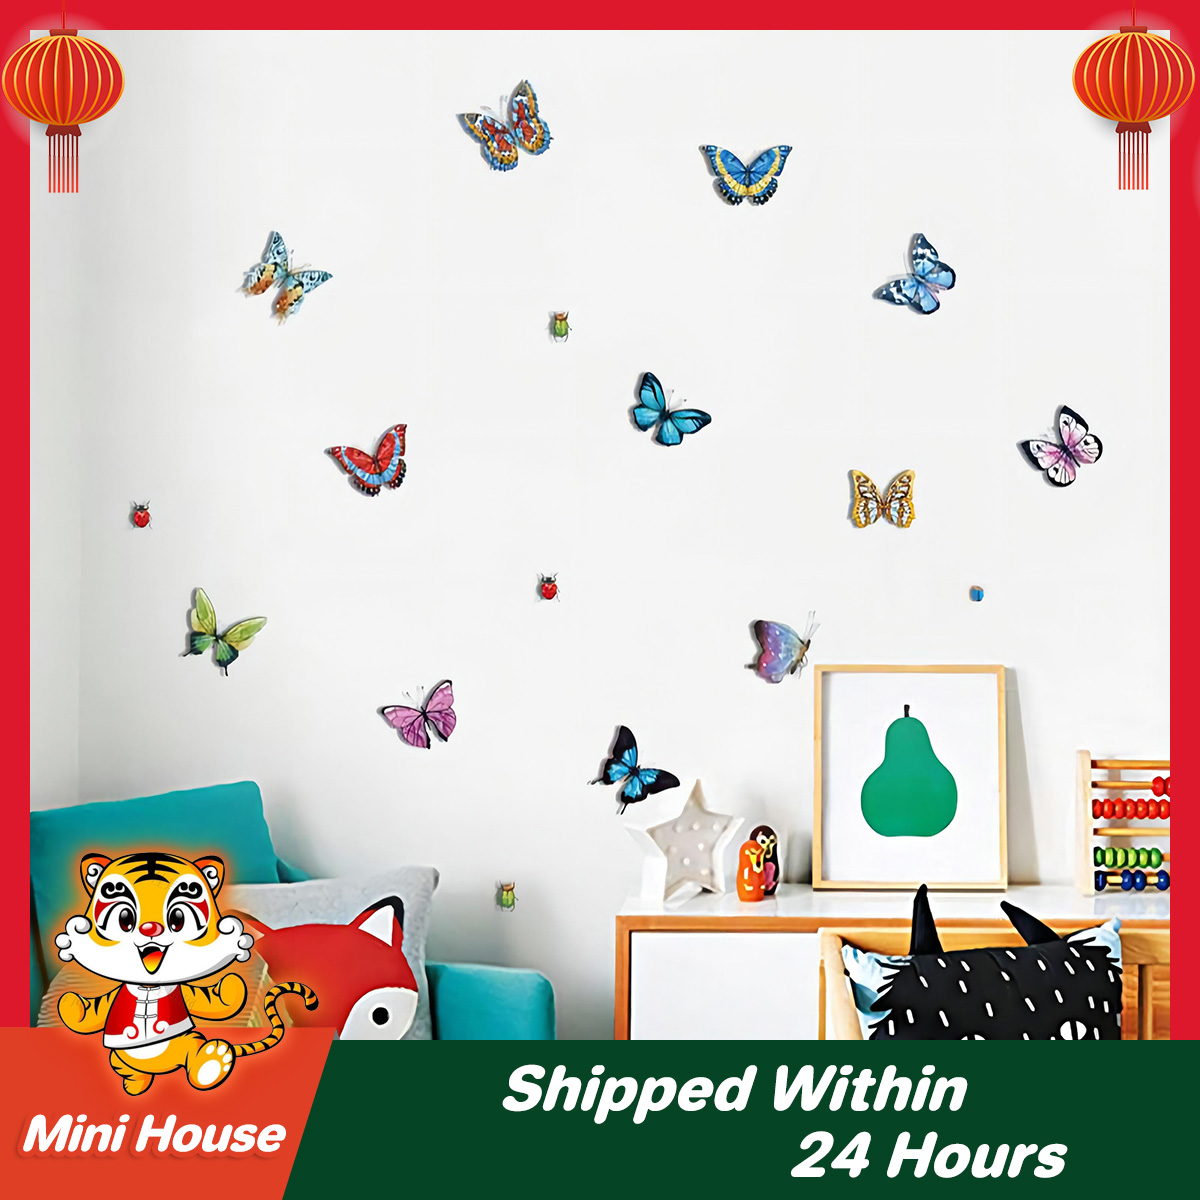 Wallpaper Butterflies Wall Stickers Decals Ladybug Wall Art Mural Peel and  Stick Design for Wall Removable Vinyl/ PVC Garden Decal for Kids Room  Nursery Classroom Bedroom Background Decor Wall Decorative Home Decoration |